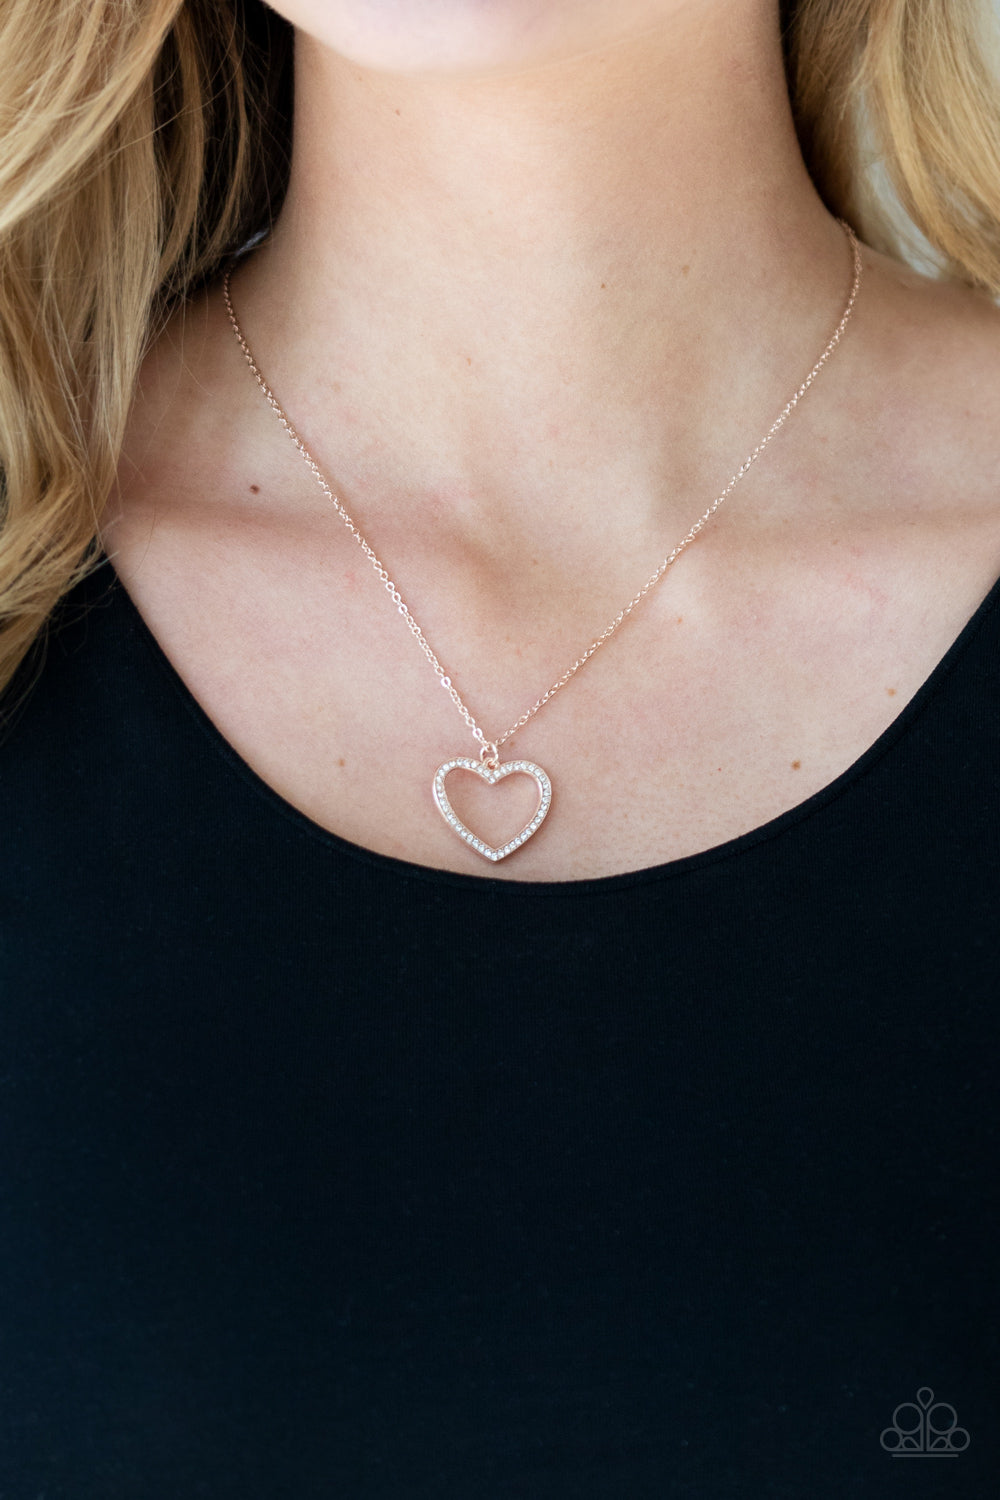 GLOW by Heart - Rose Gold Necklace